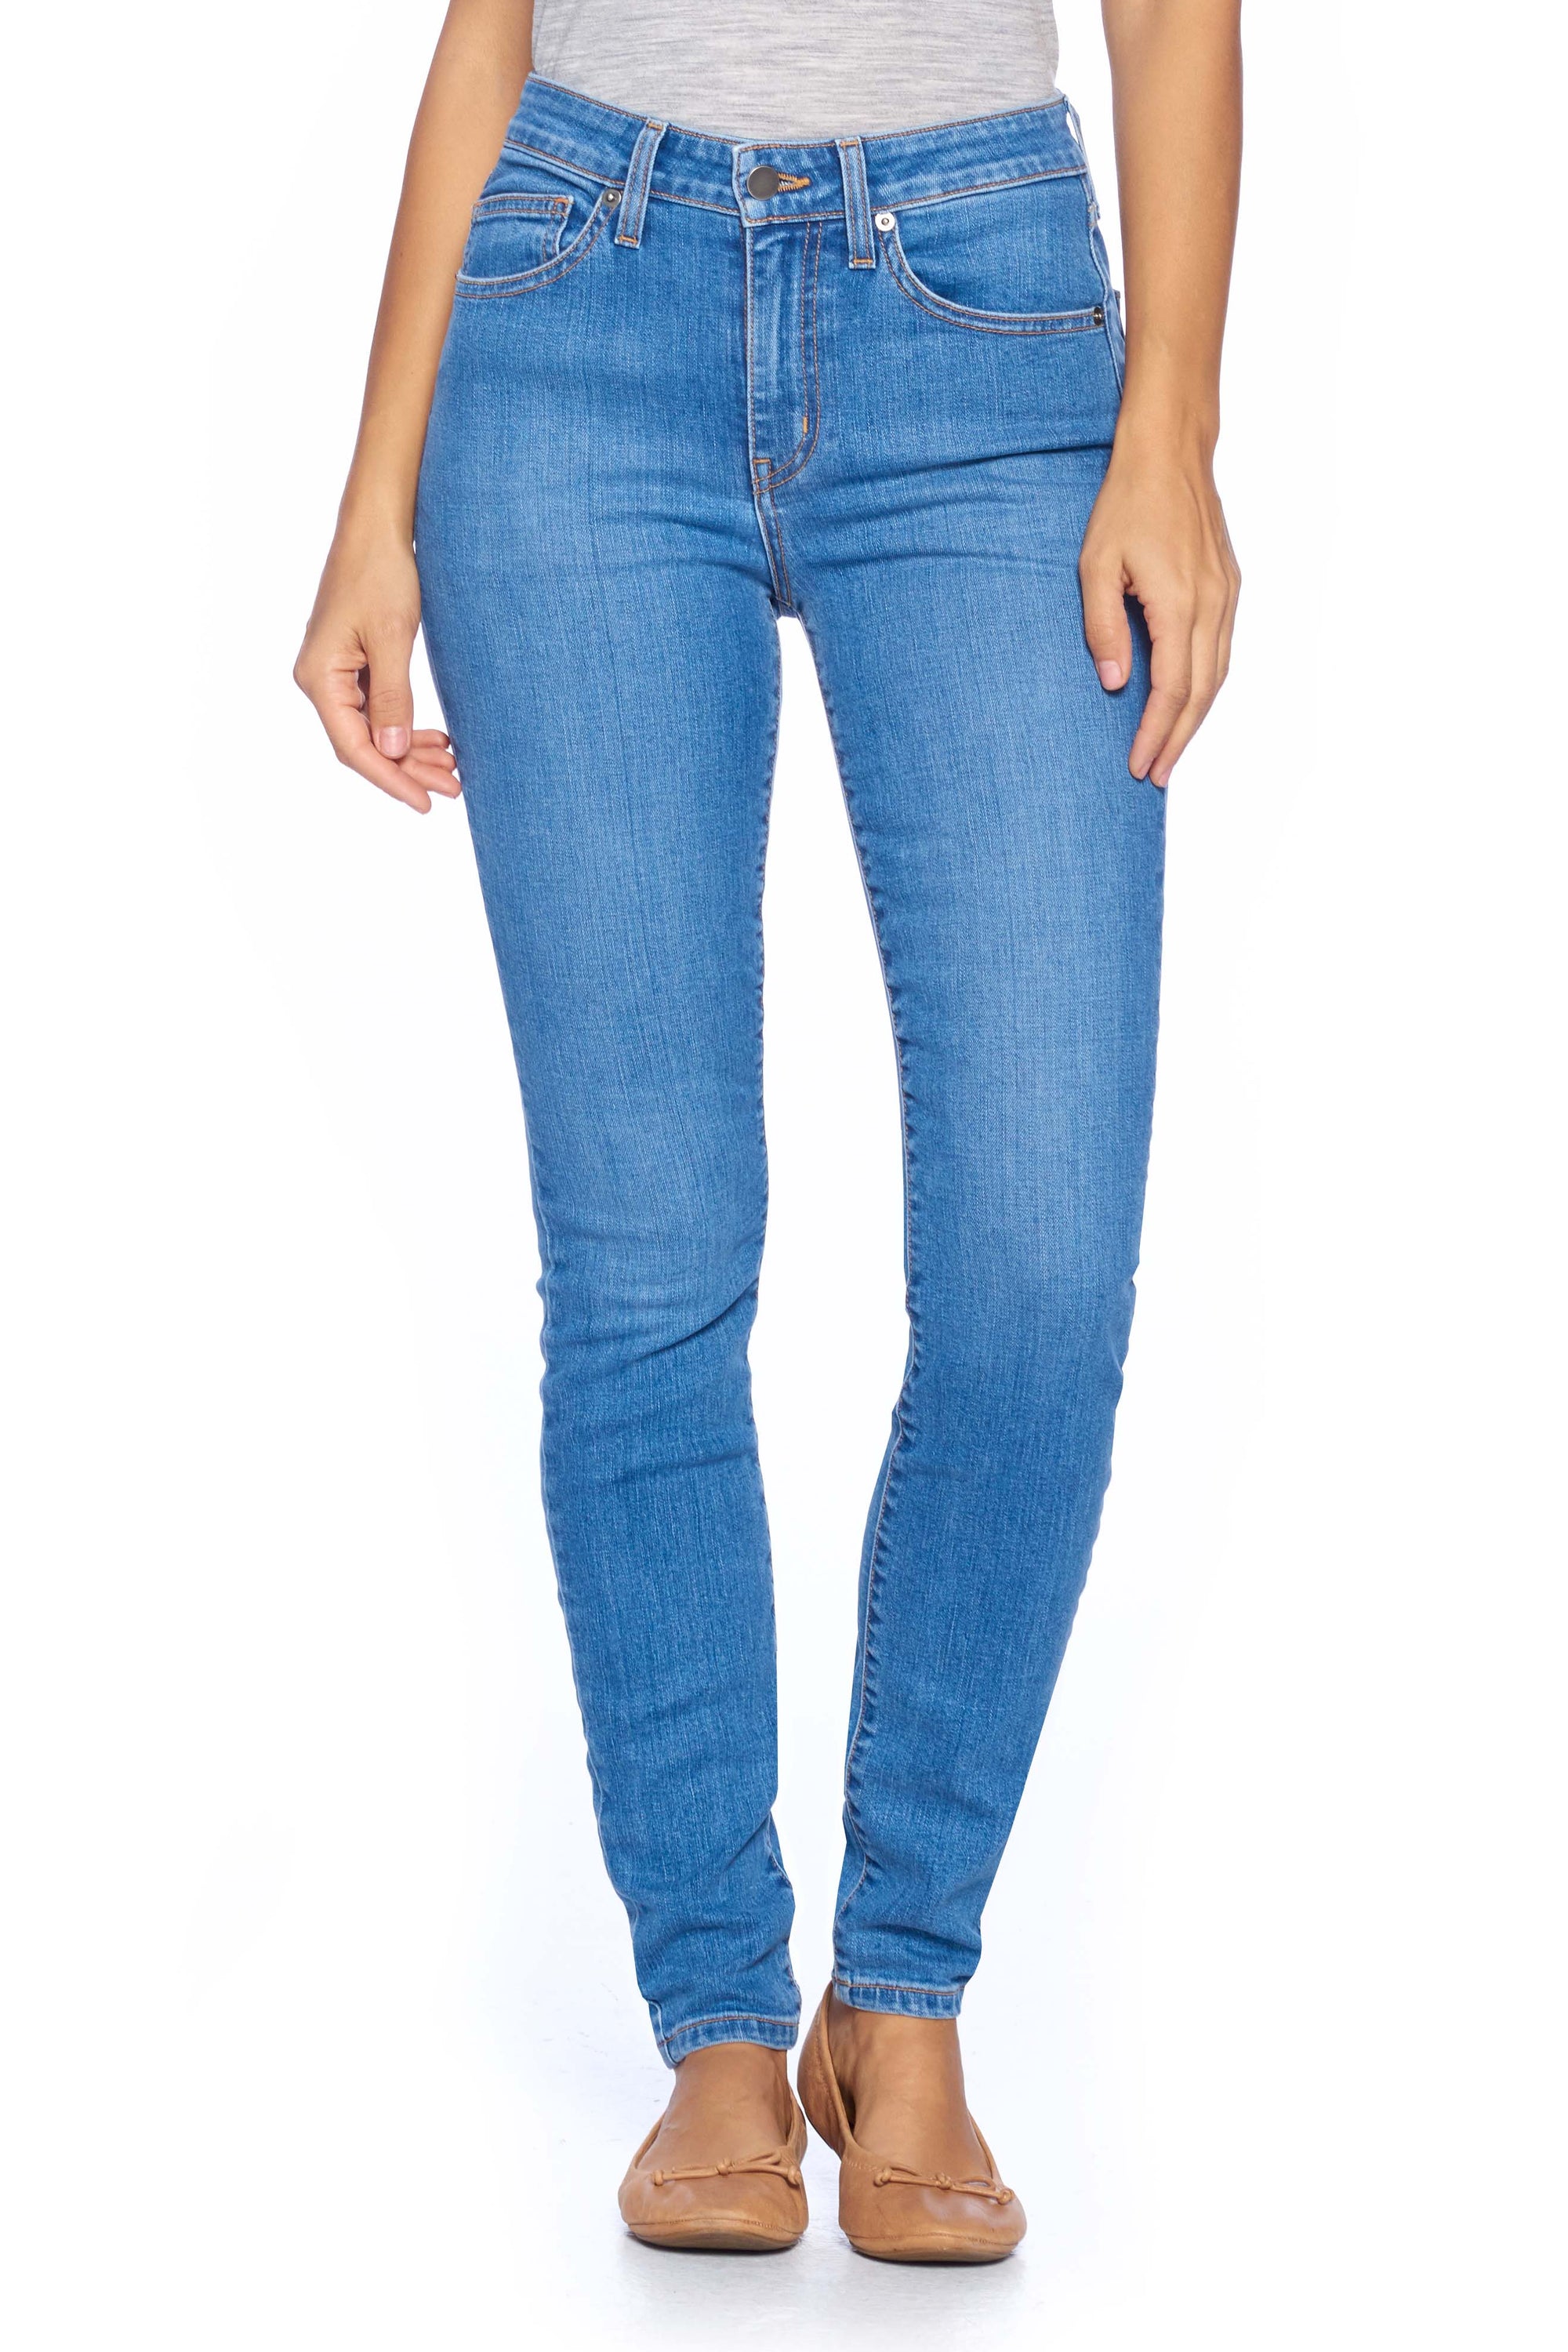 Women's travel jeans in faded indigo comfort skinny style